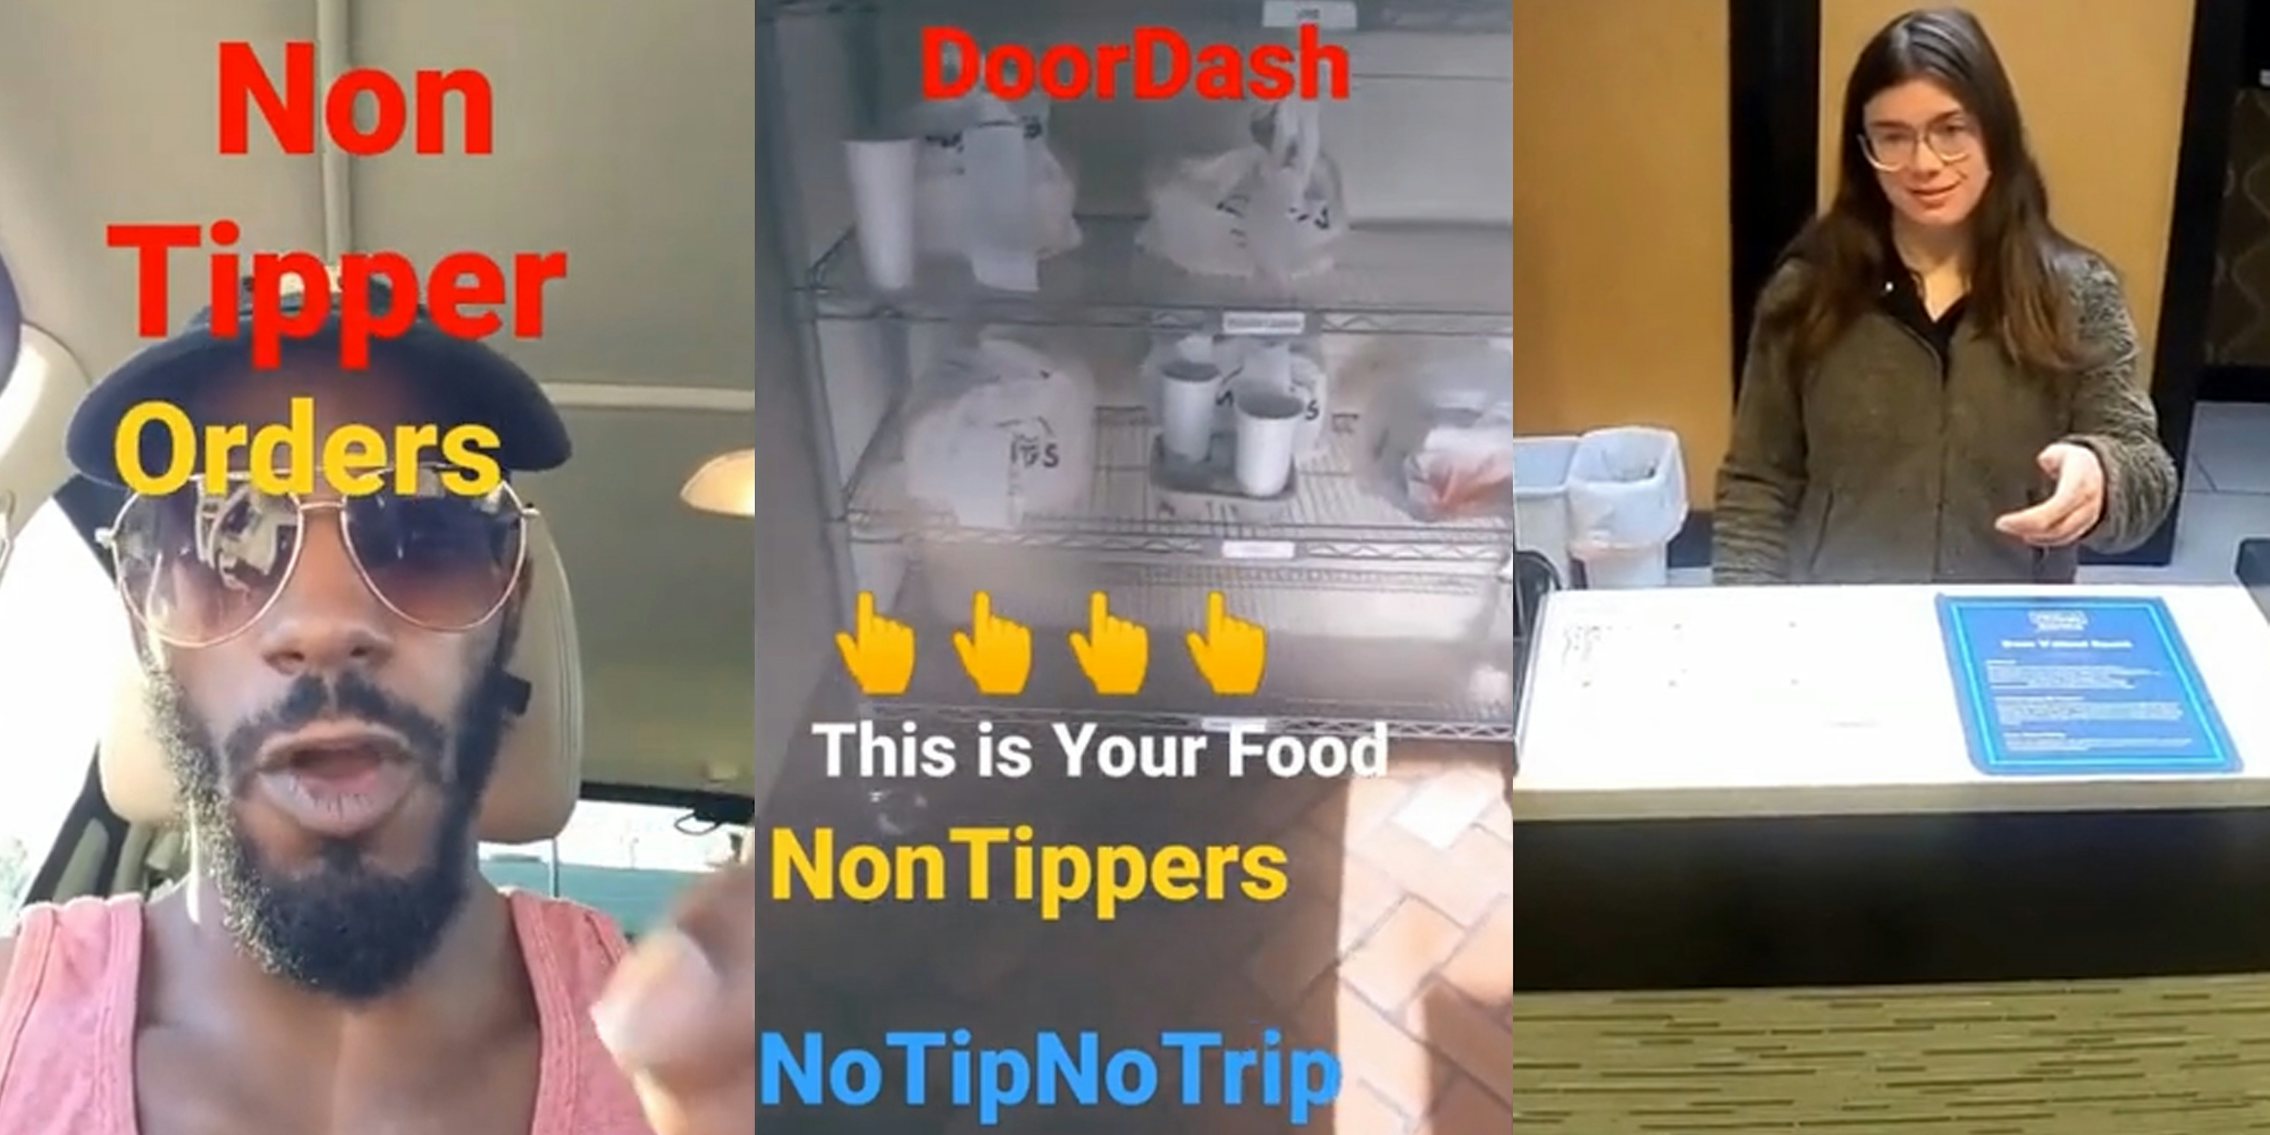 DoorDash is testing warnings about bad service if you don't tip your driver